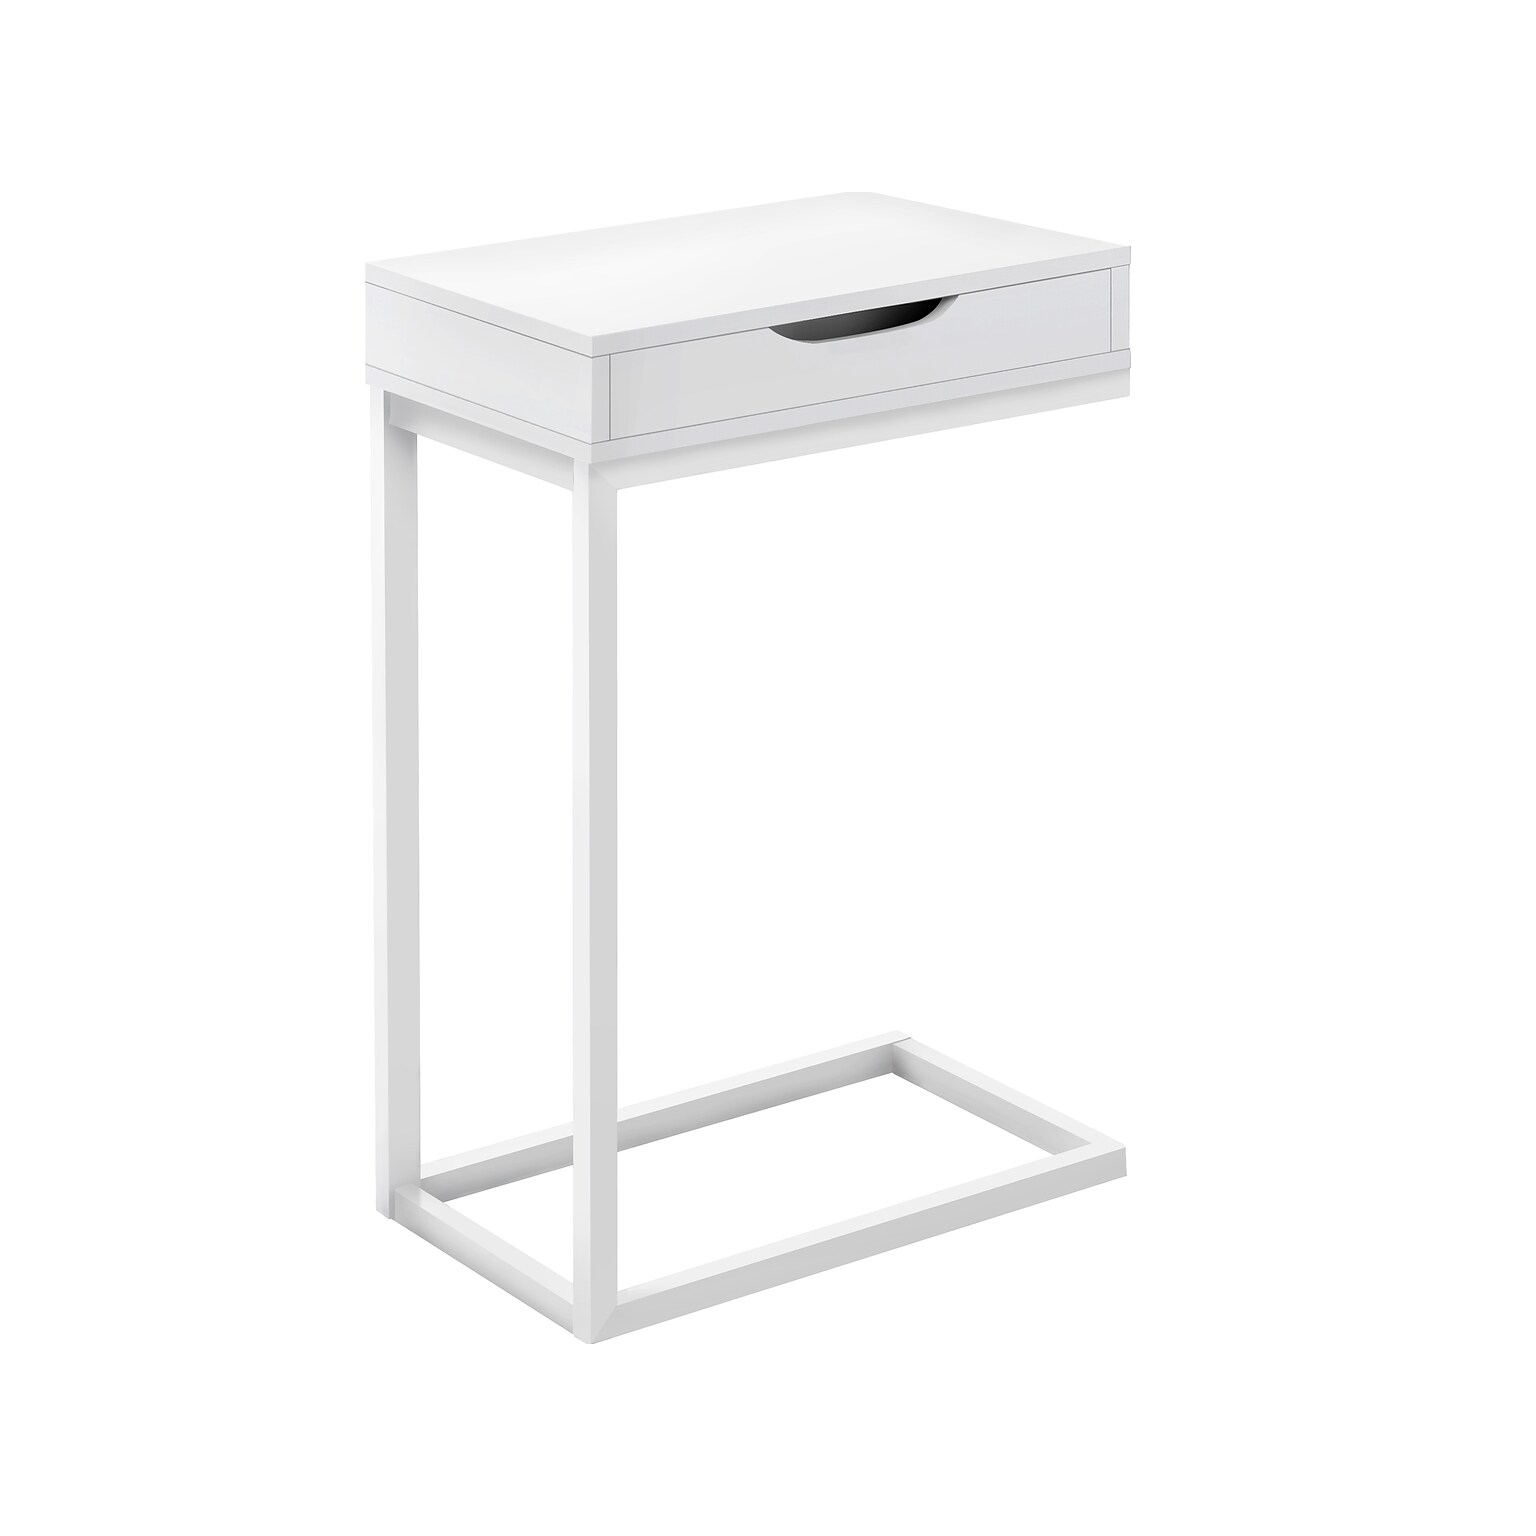 Monarch Specialties Inc. 16 x 10.25 Accent Table, White (I 3601)